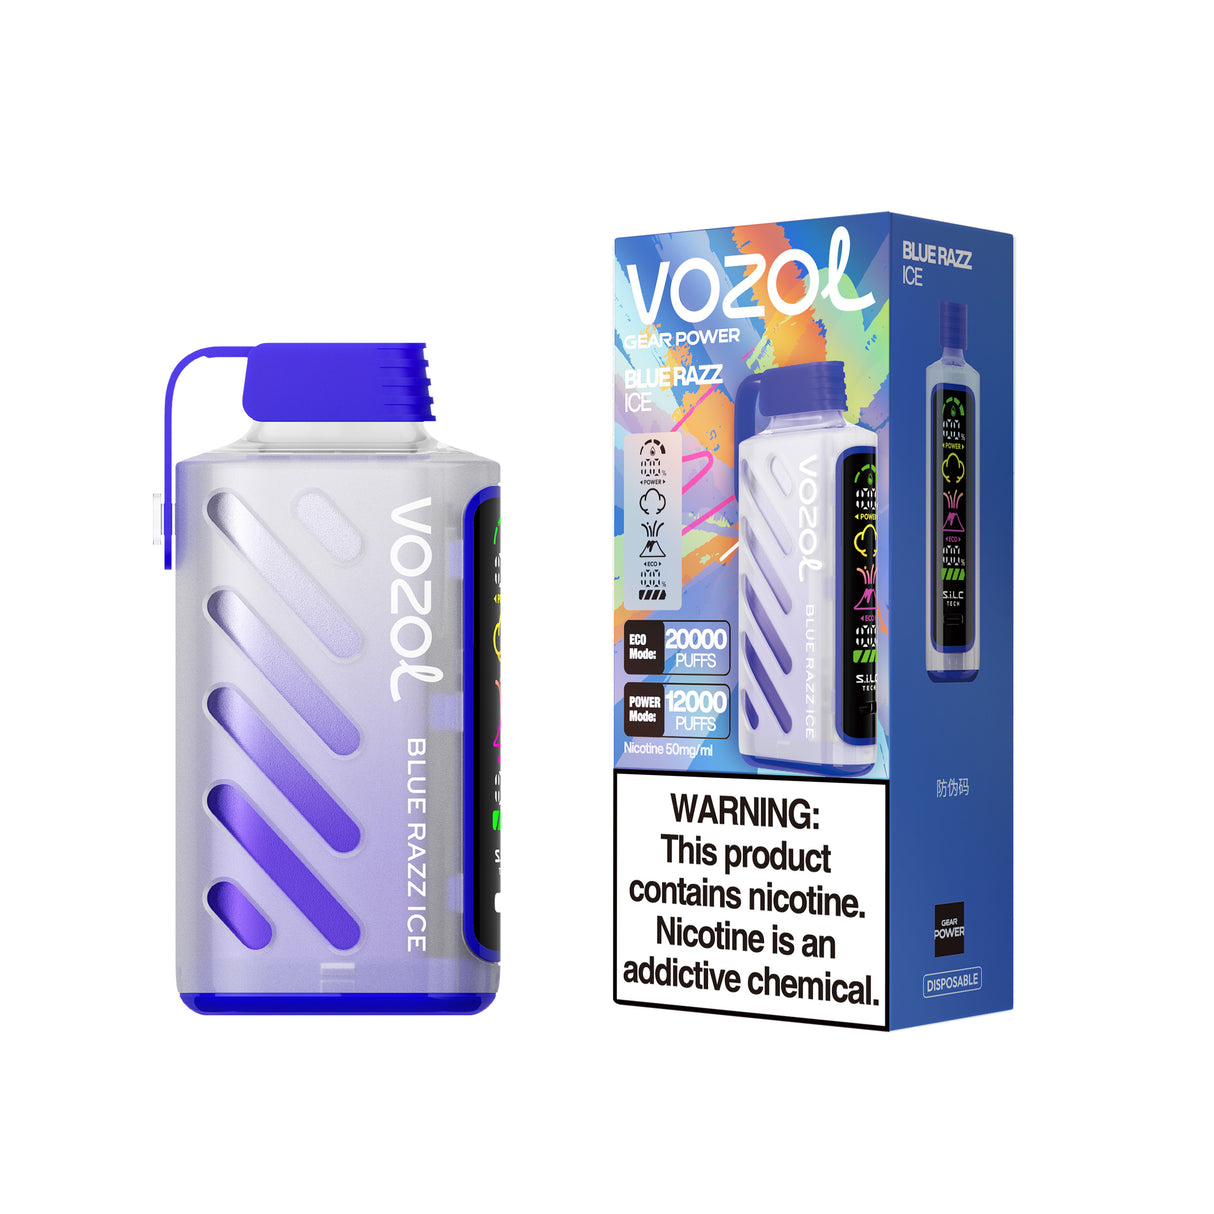 VOZOL Gear Power 20000 Puffs Rechargeable Disposable Device - 20000 Puffs [BUY 5 BOX GET 1 BOX FREE]